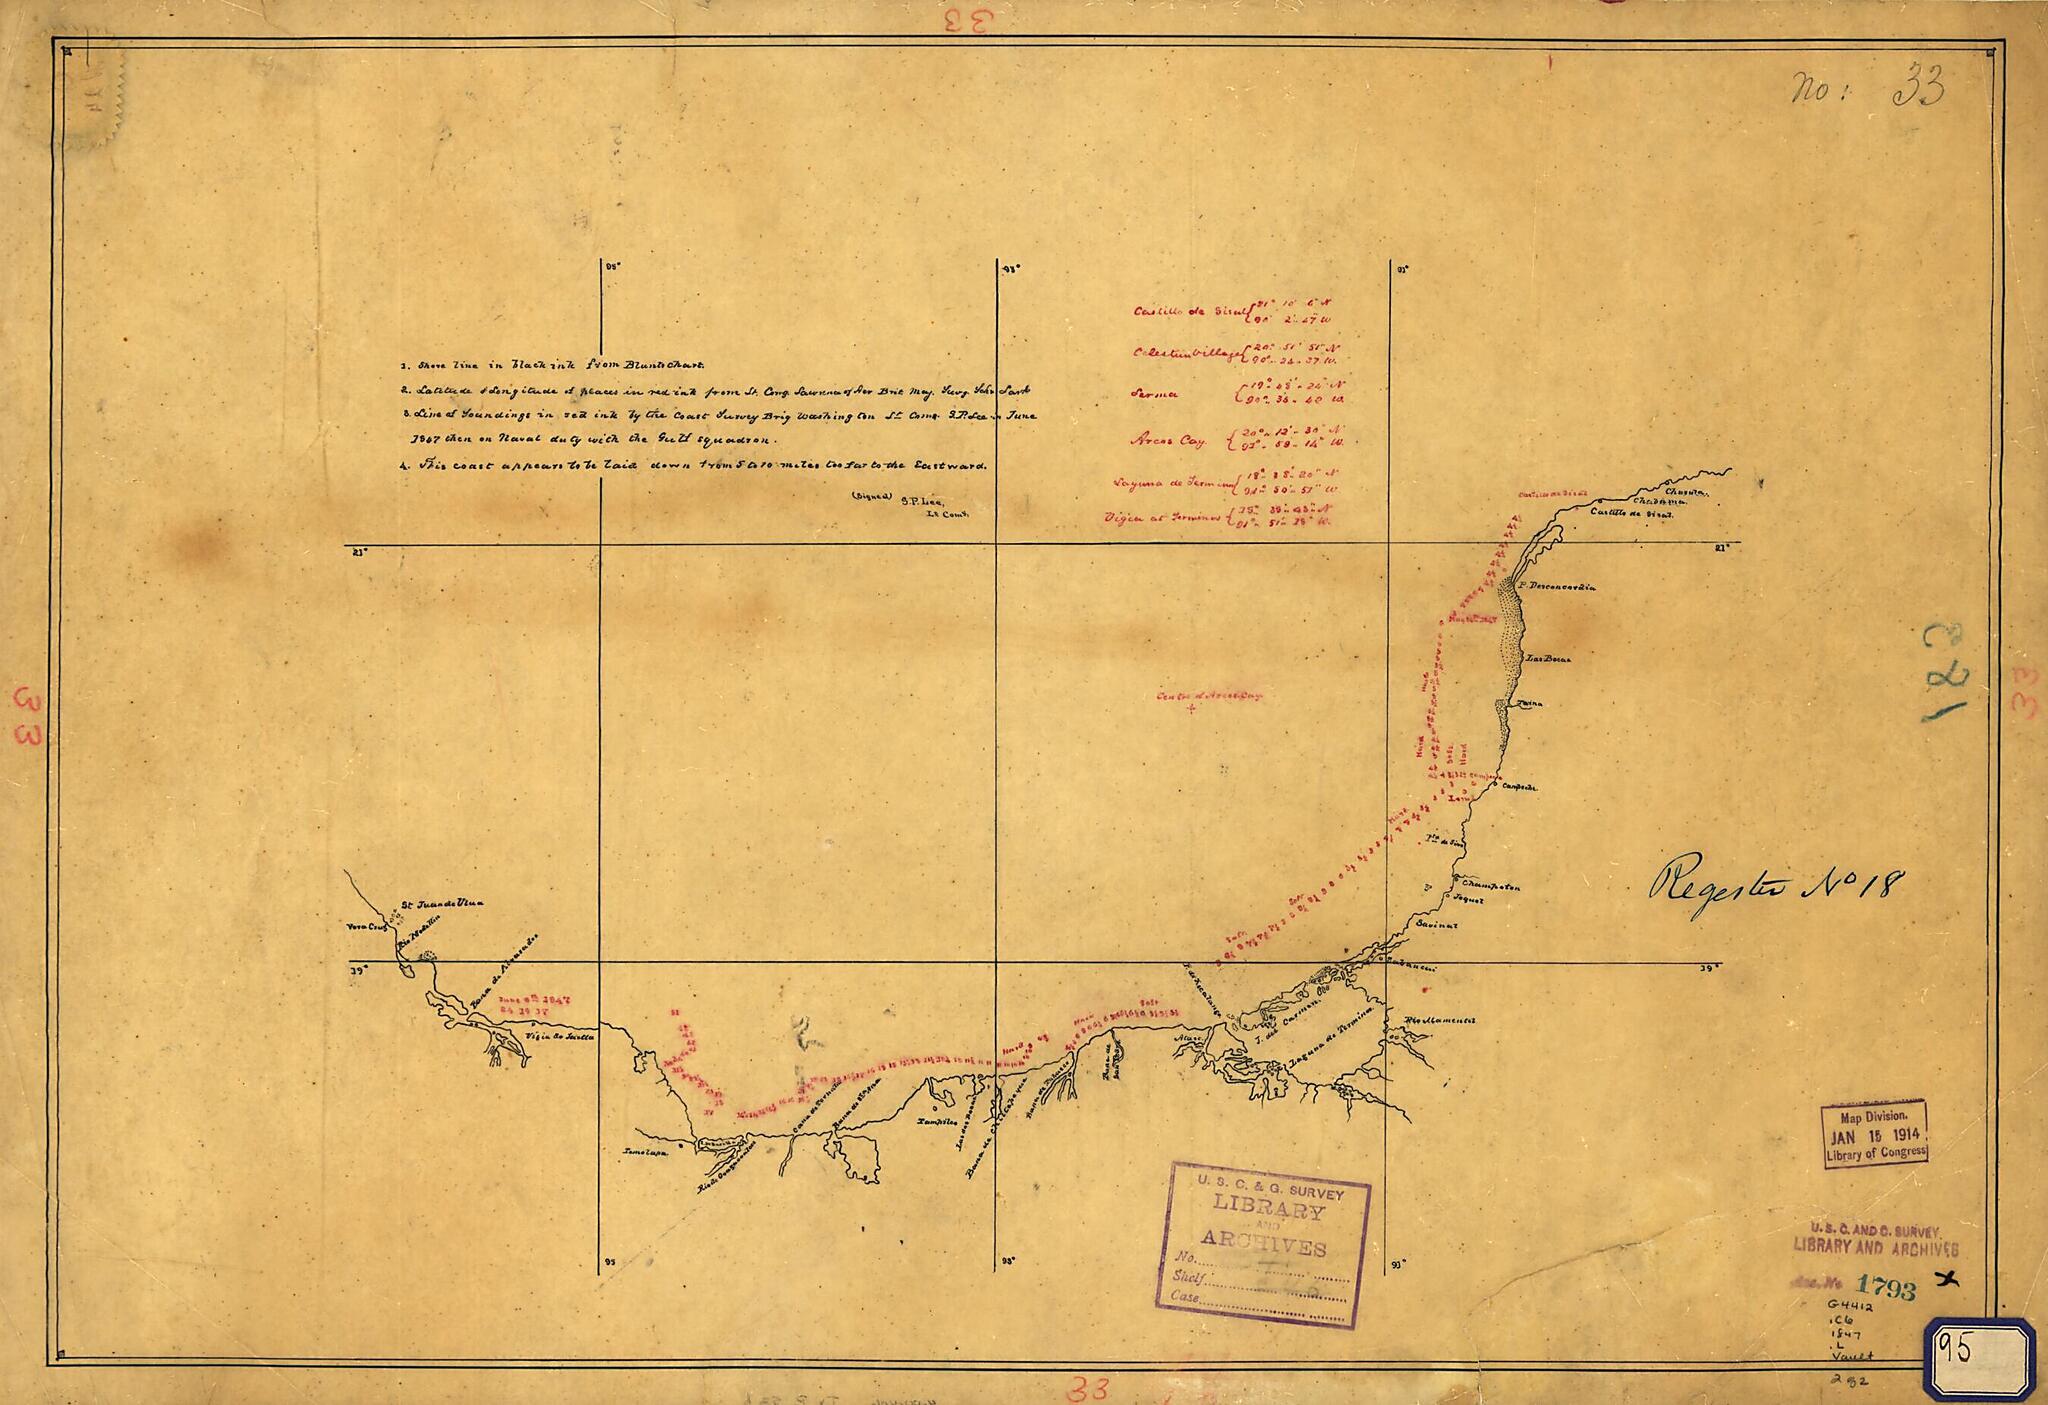 This old map of Map Showing Coast of Mexico from Vera Cruz to Chuxula from 1847 was created by S. P. Lee in 1847